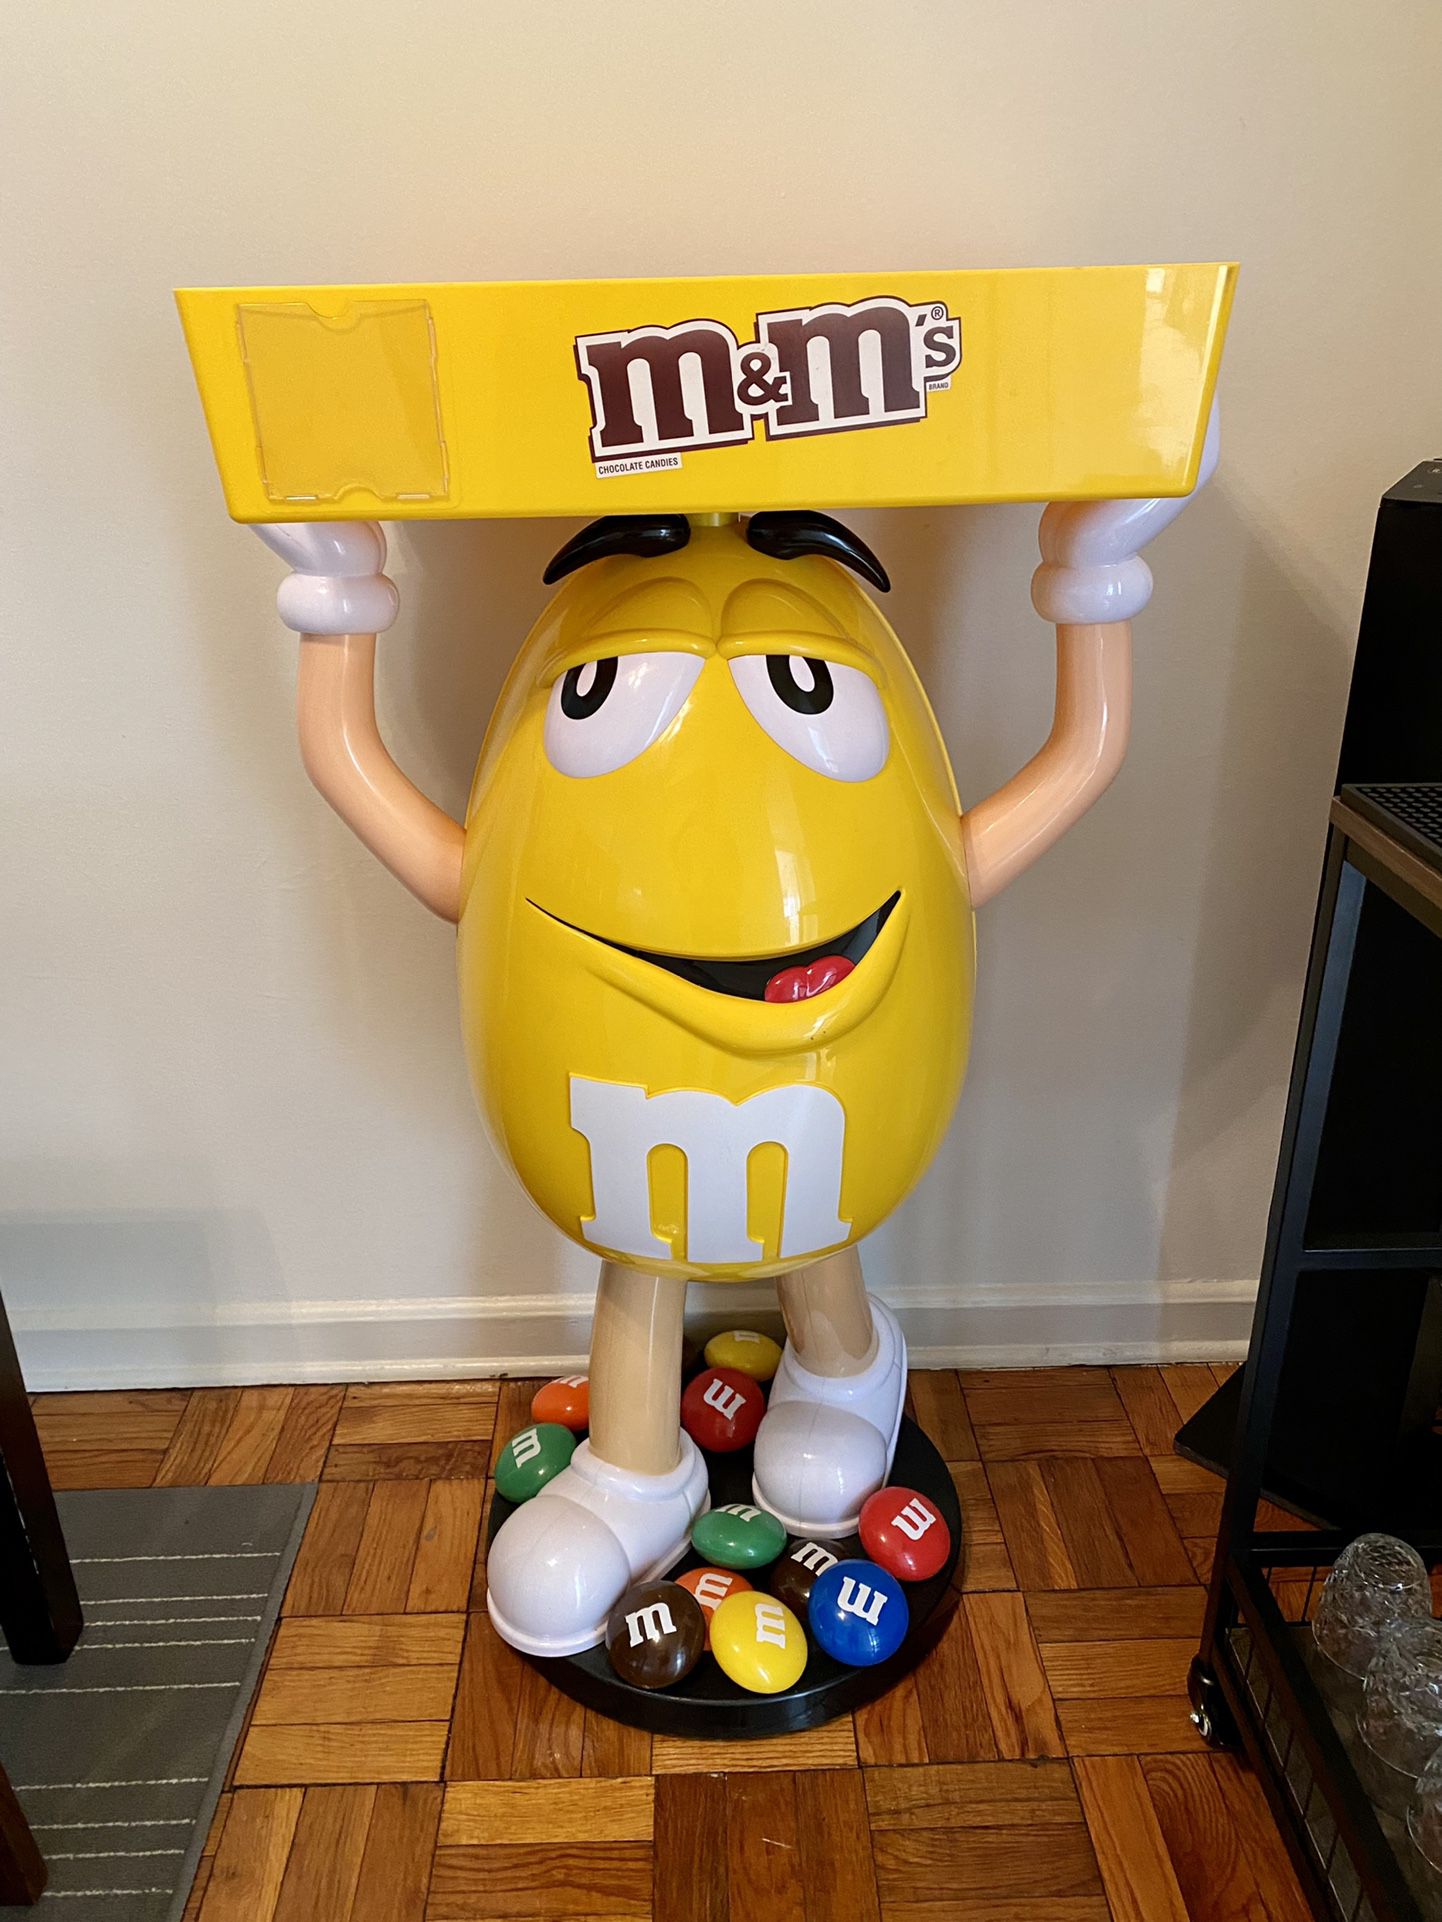 Yellow M&M Mars Candy Store Display for Sale in Arlington, VA